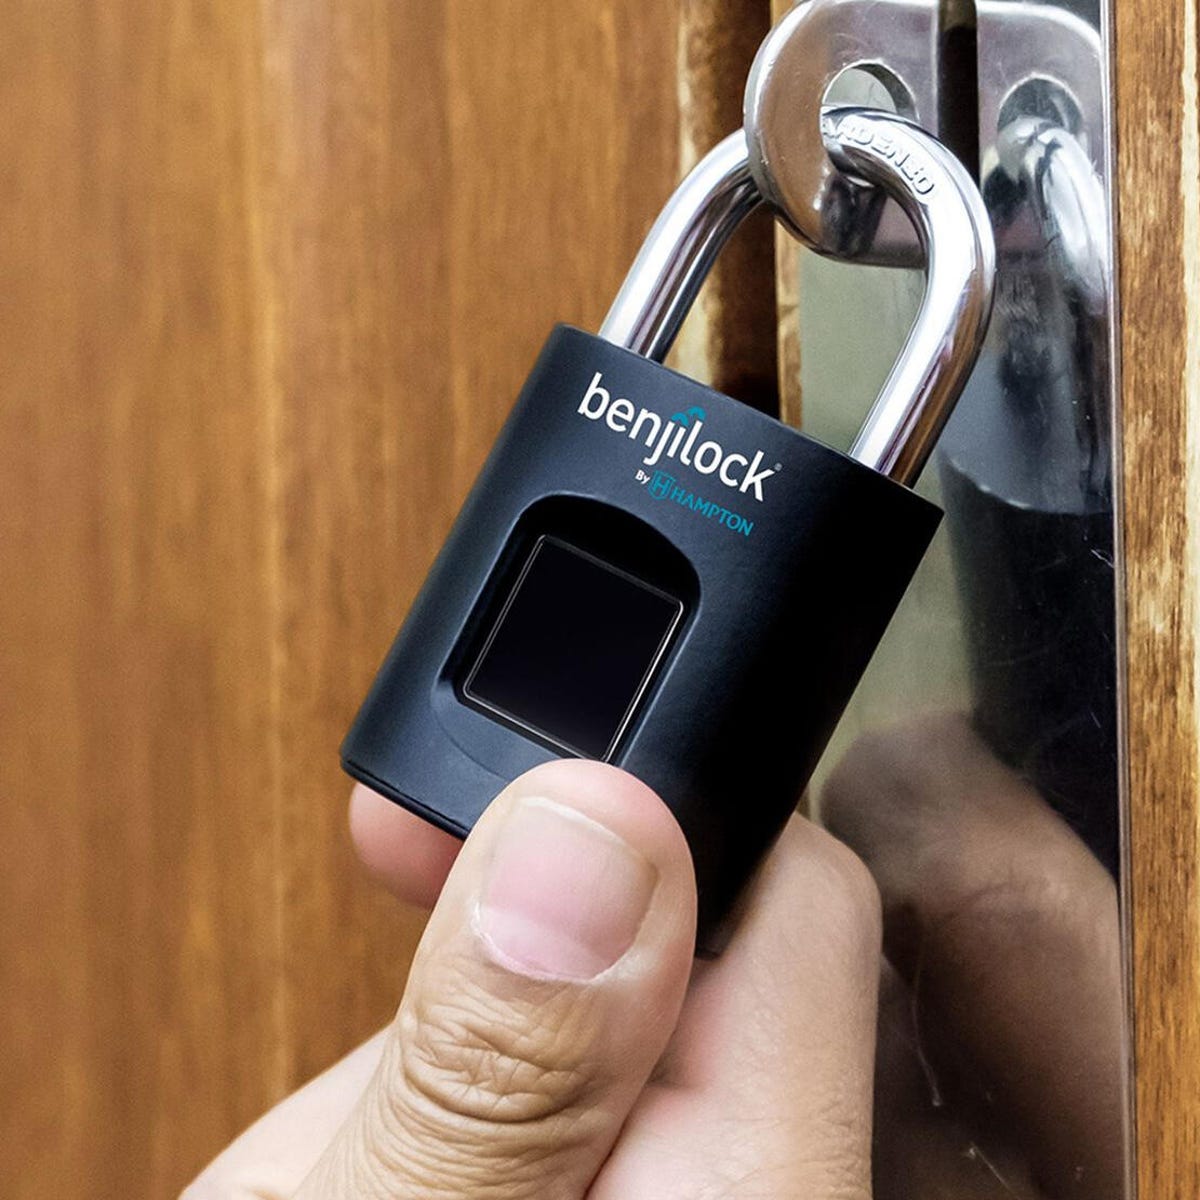 Save 15% on this smart padlock you unlock with your fingerprint